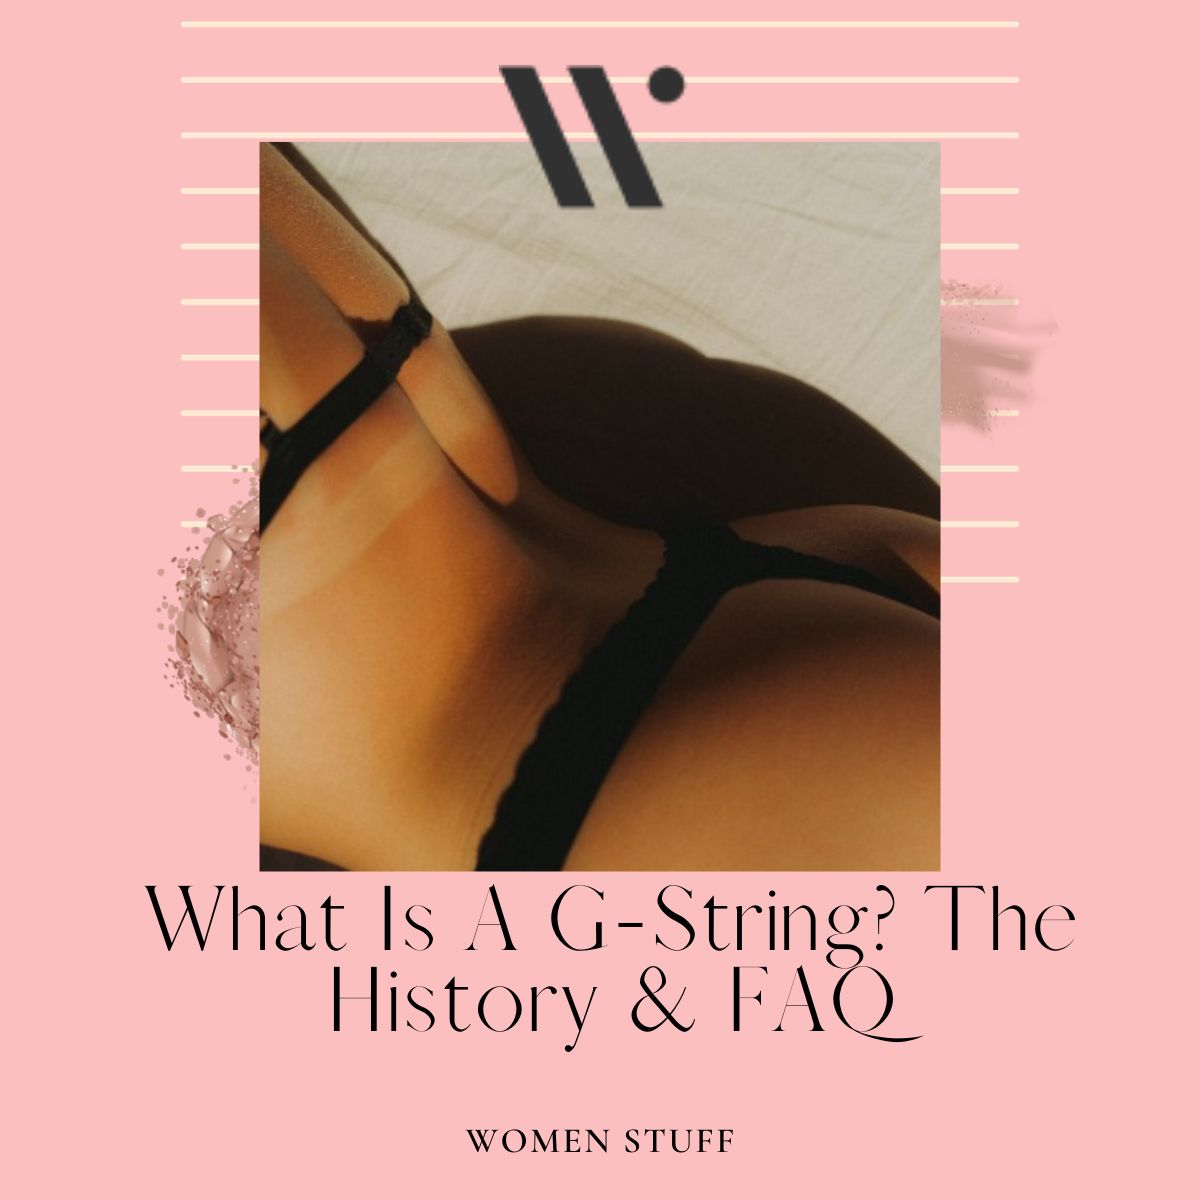 What Is a G-String? The History & FAQ - Women Stuff